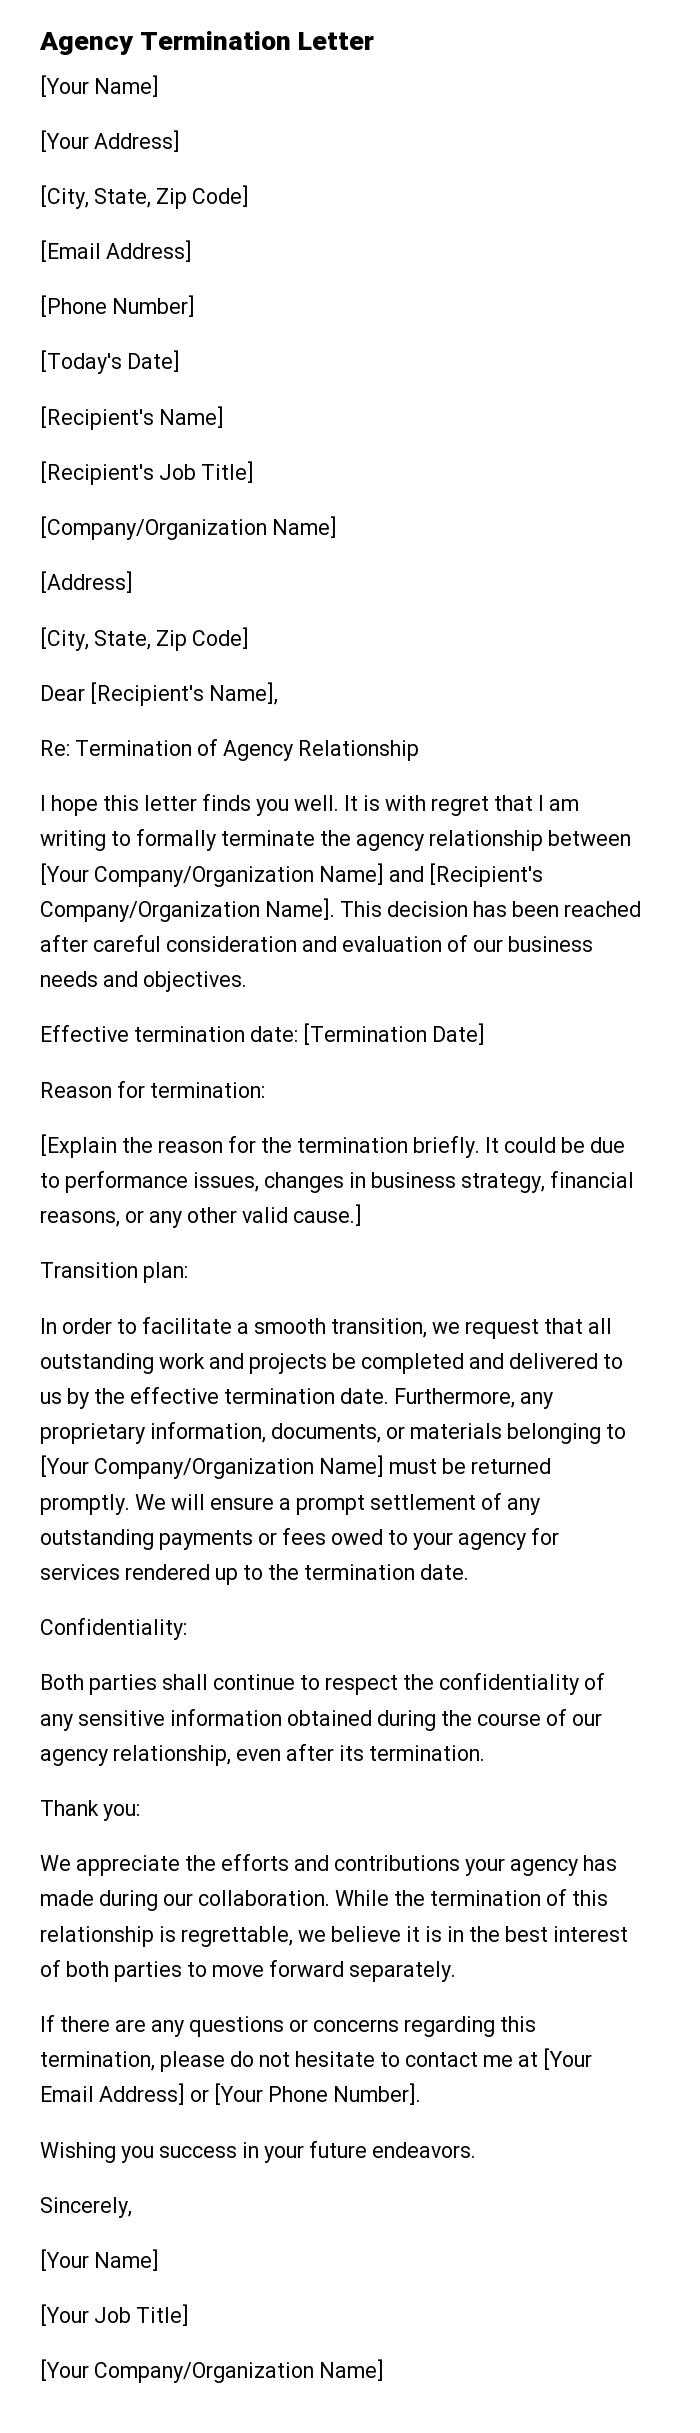 Agency Termination Letter